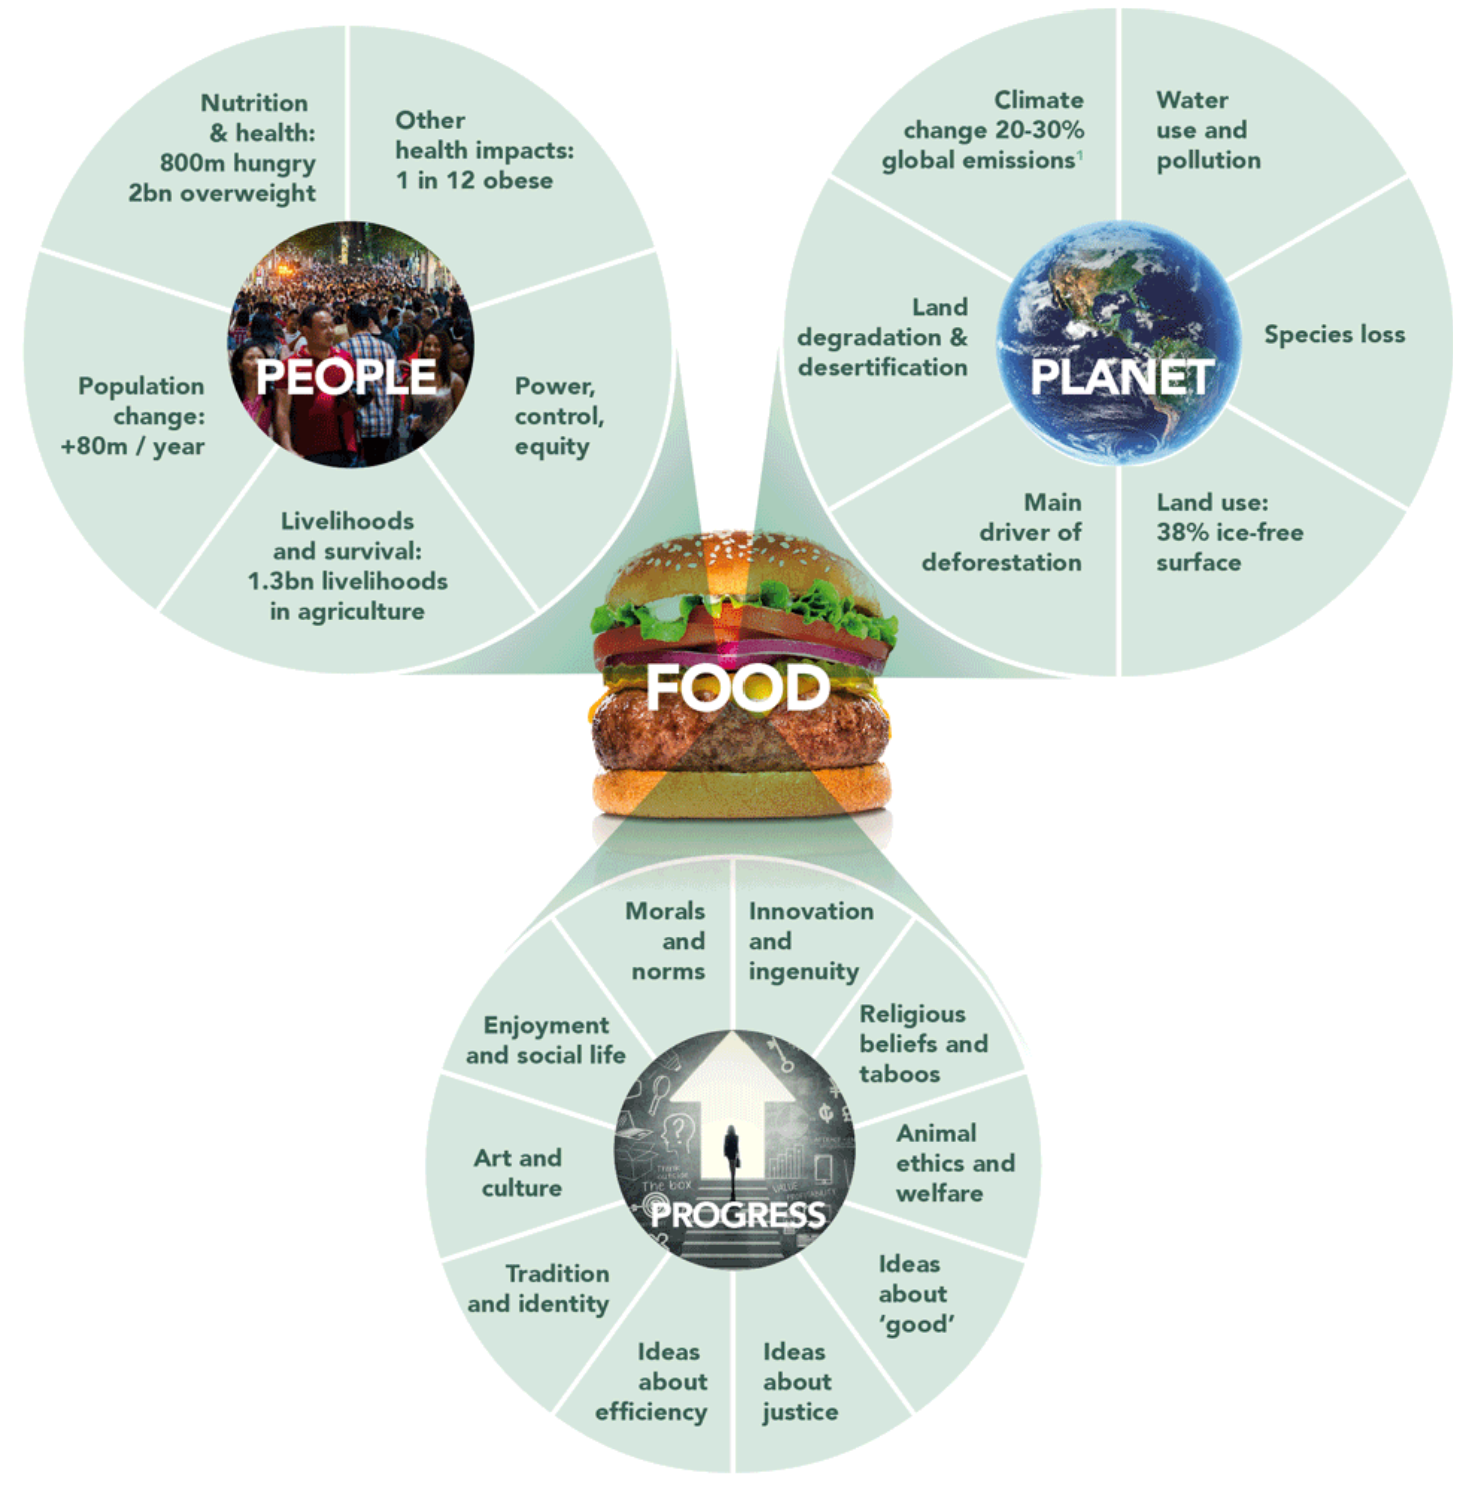 Figure 6: Connection between food systems and other issues and concerns